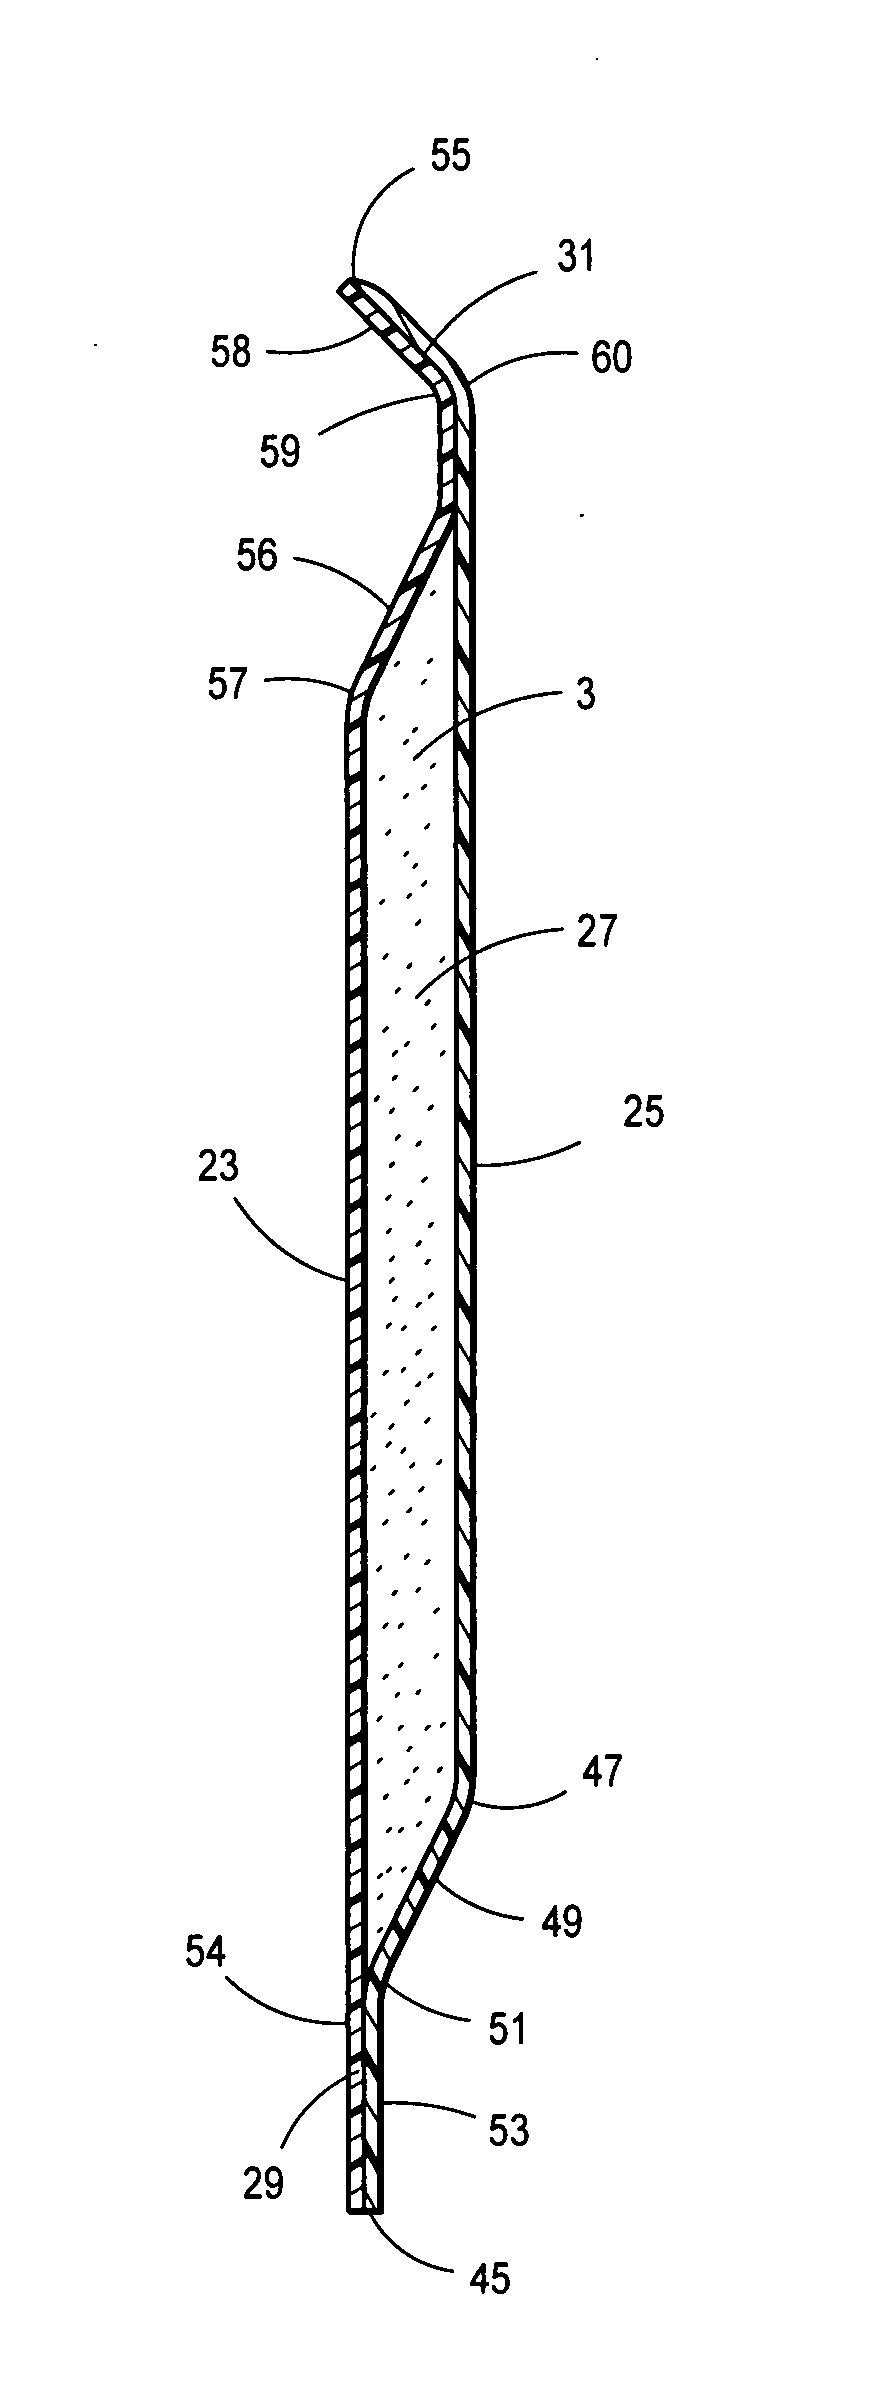 Method of thermoforming fiber reinforced thermoplastic sandwich panels, thermoformed articles, and modular container structure assembled therefrom